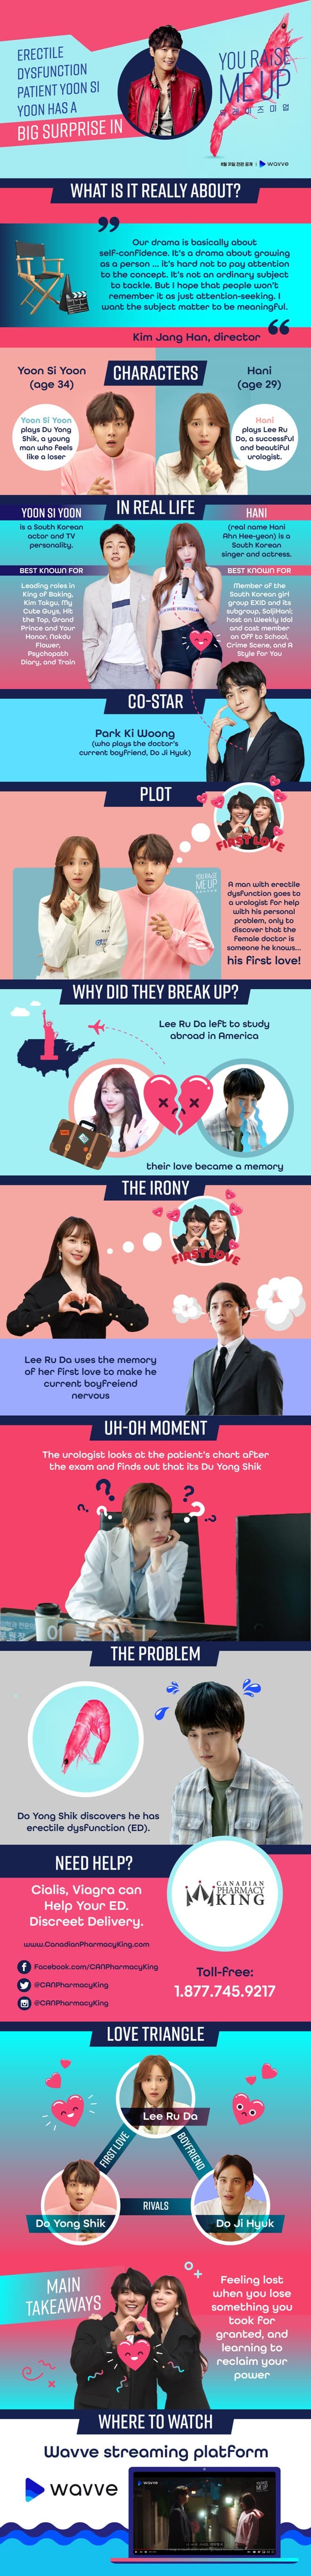 You Raise Me Up infographic